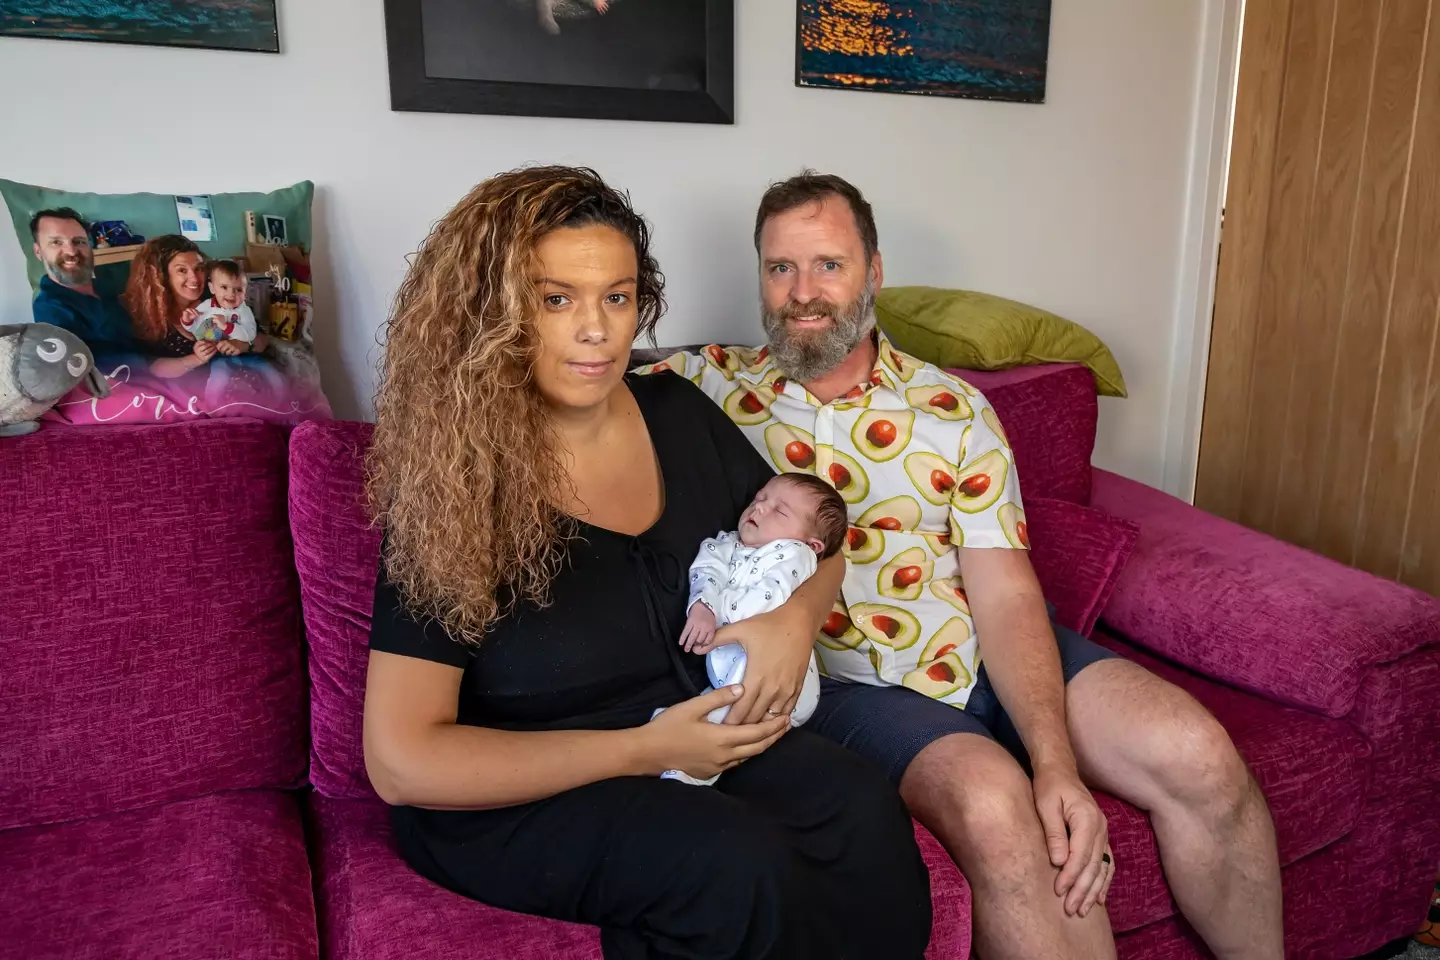 Angharad Woolley gave birth to a healthy baby girl with the help of her husband Paul.